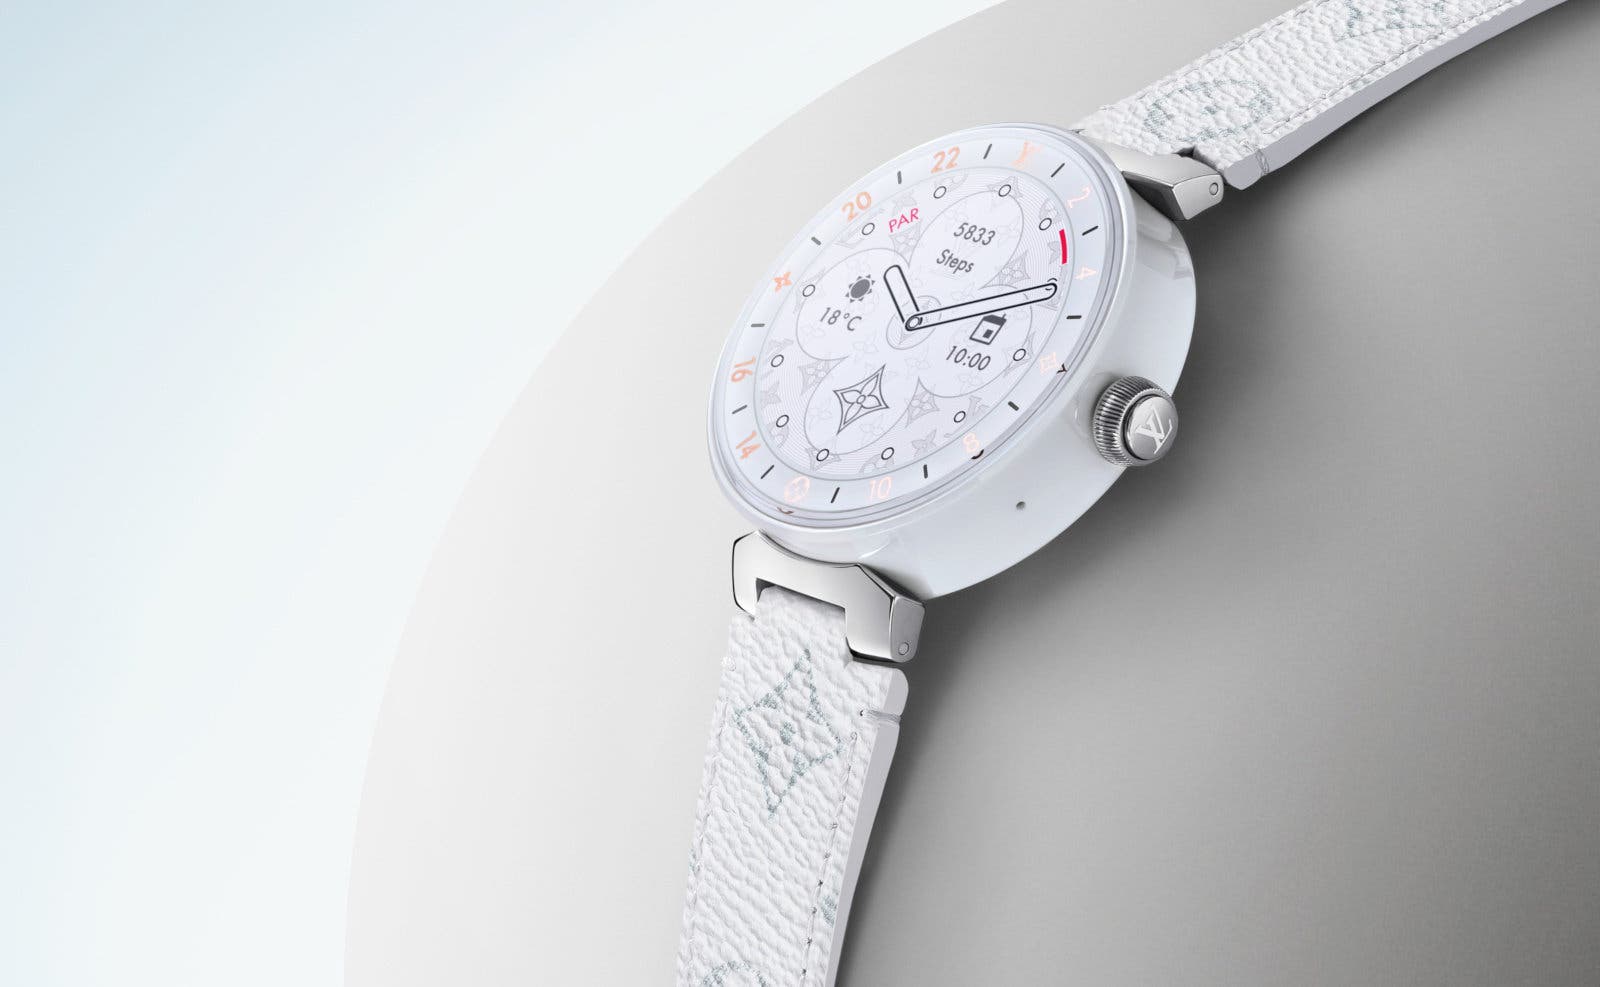 louis vuitton Tambour Horizon smartwatch 2019 edition announced with Snapdragon Wear 3100 ...